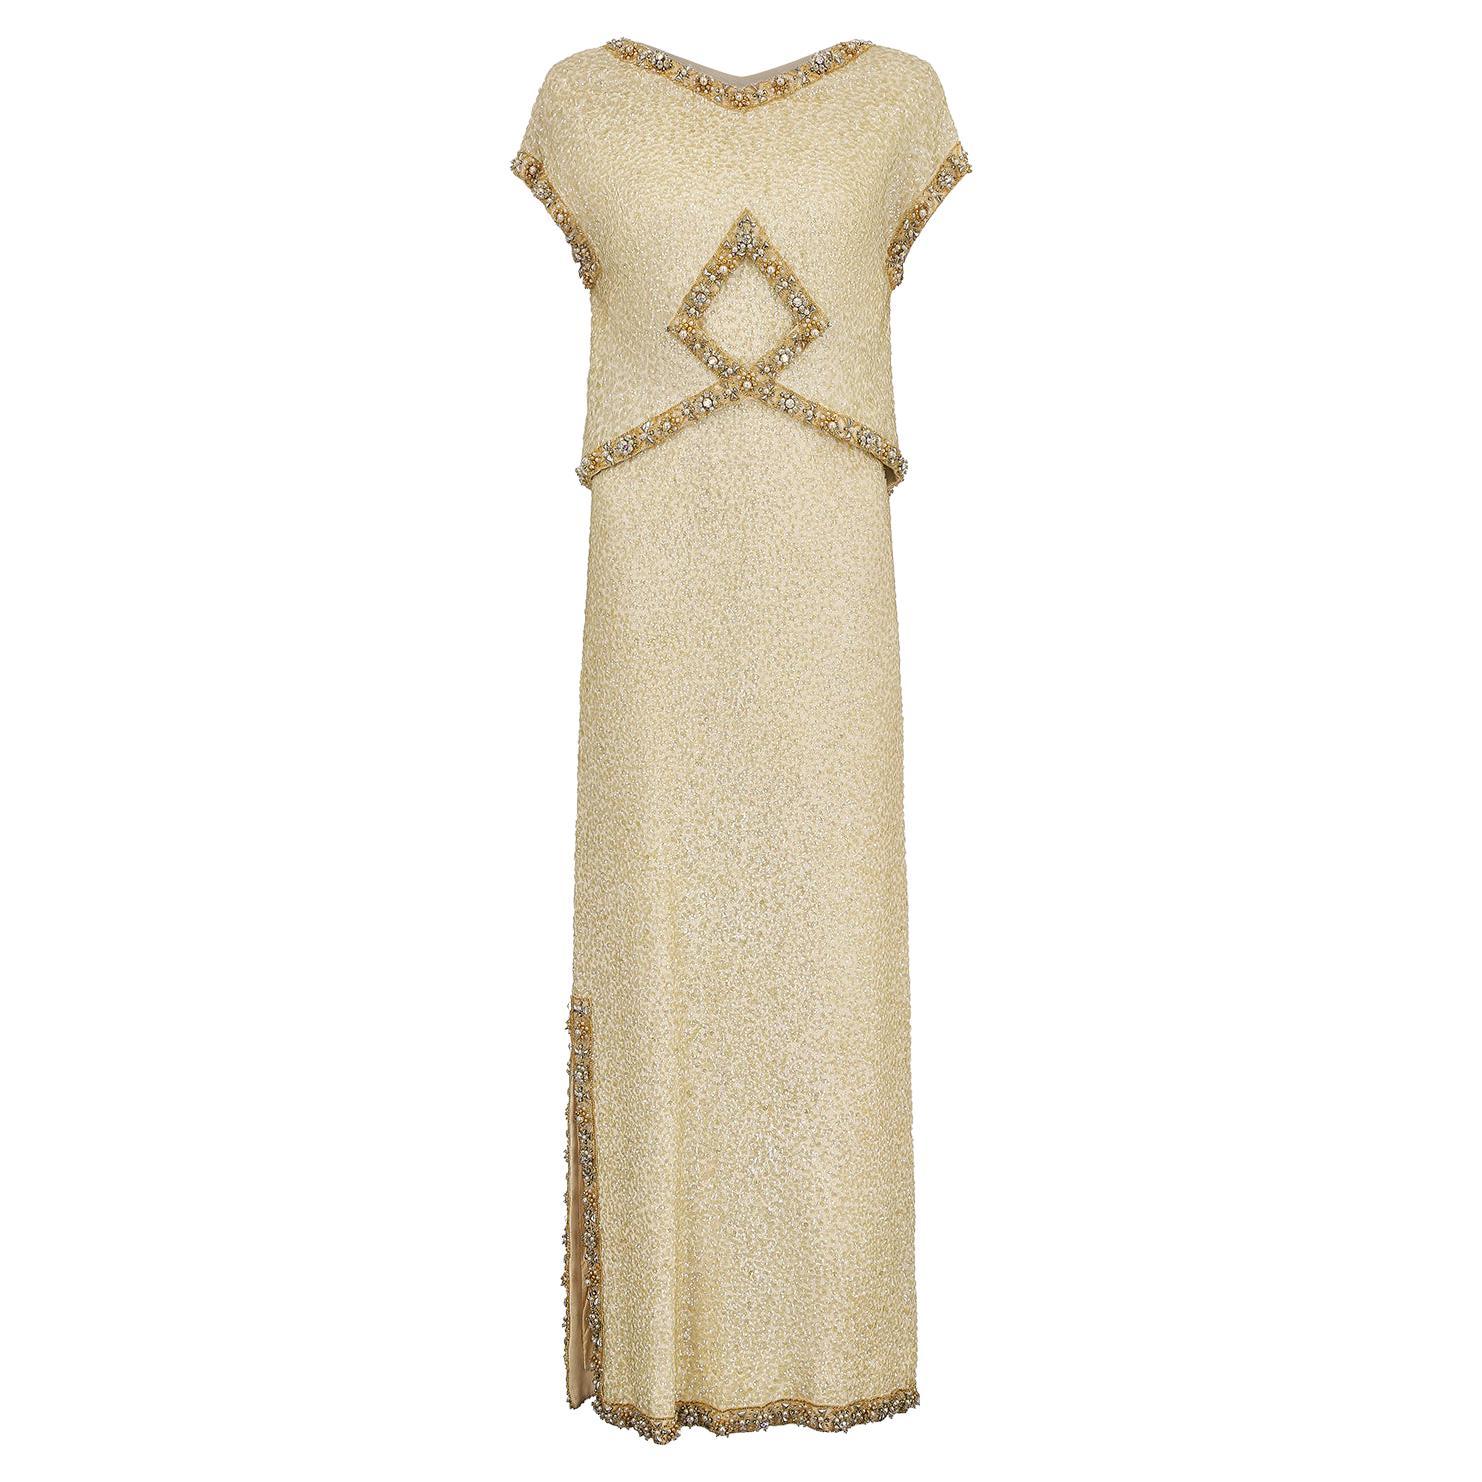 1960s Norman Hartnell Couture Gold Sequinned and Beaded Dress